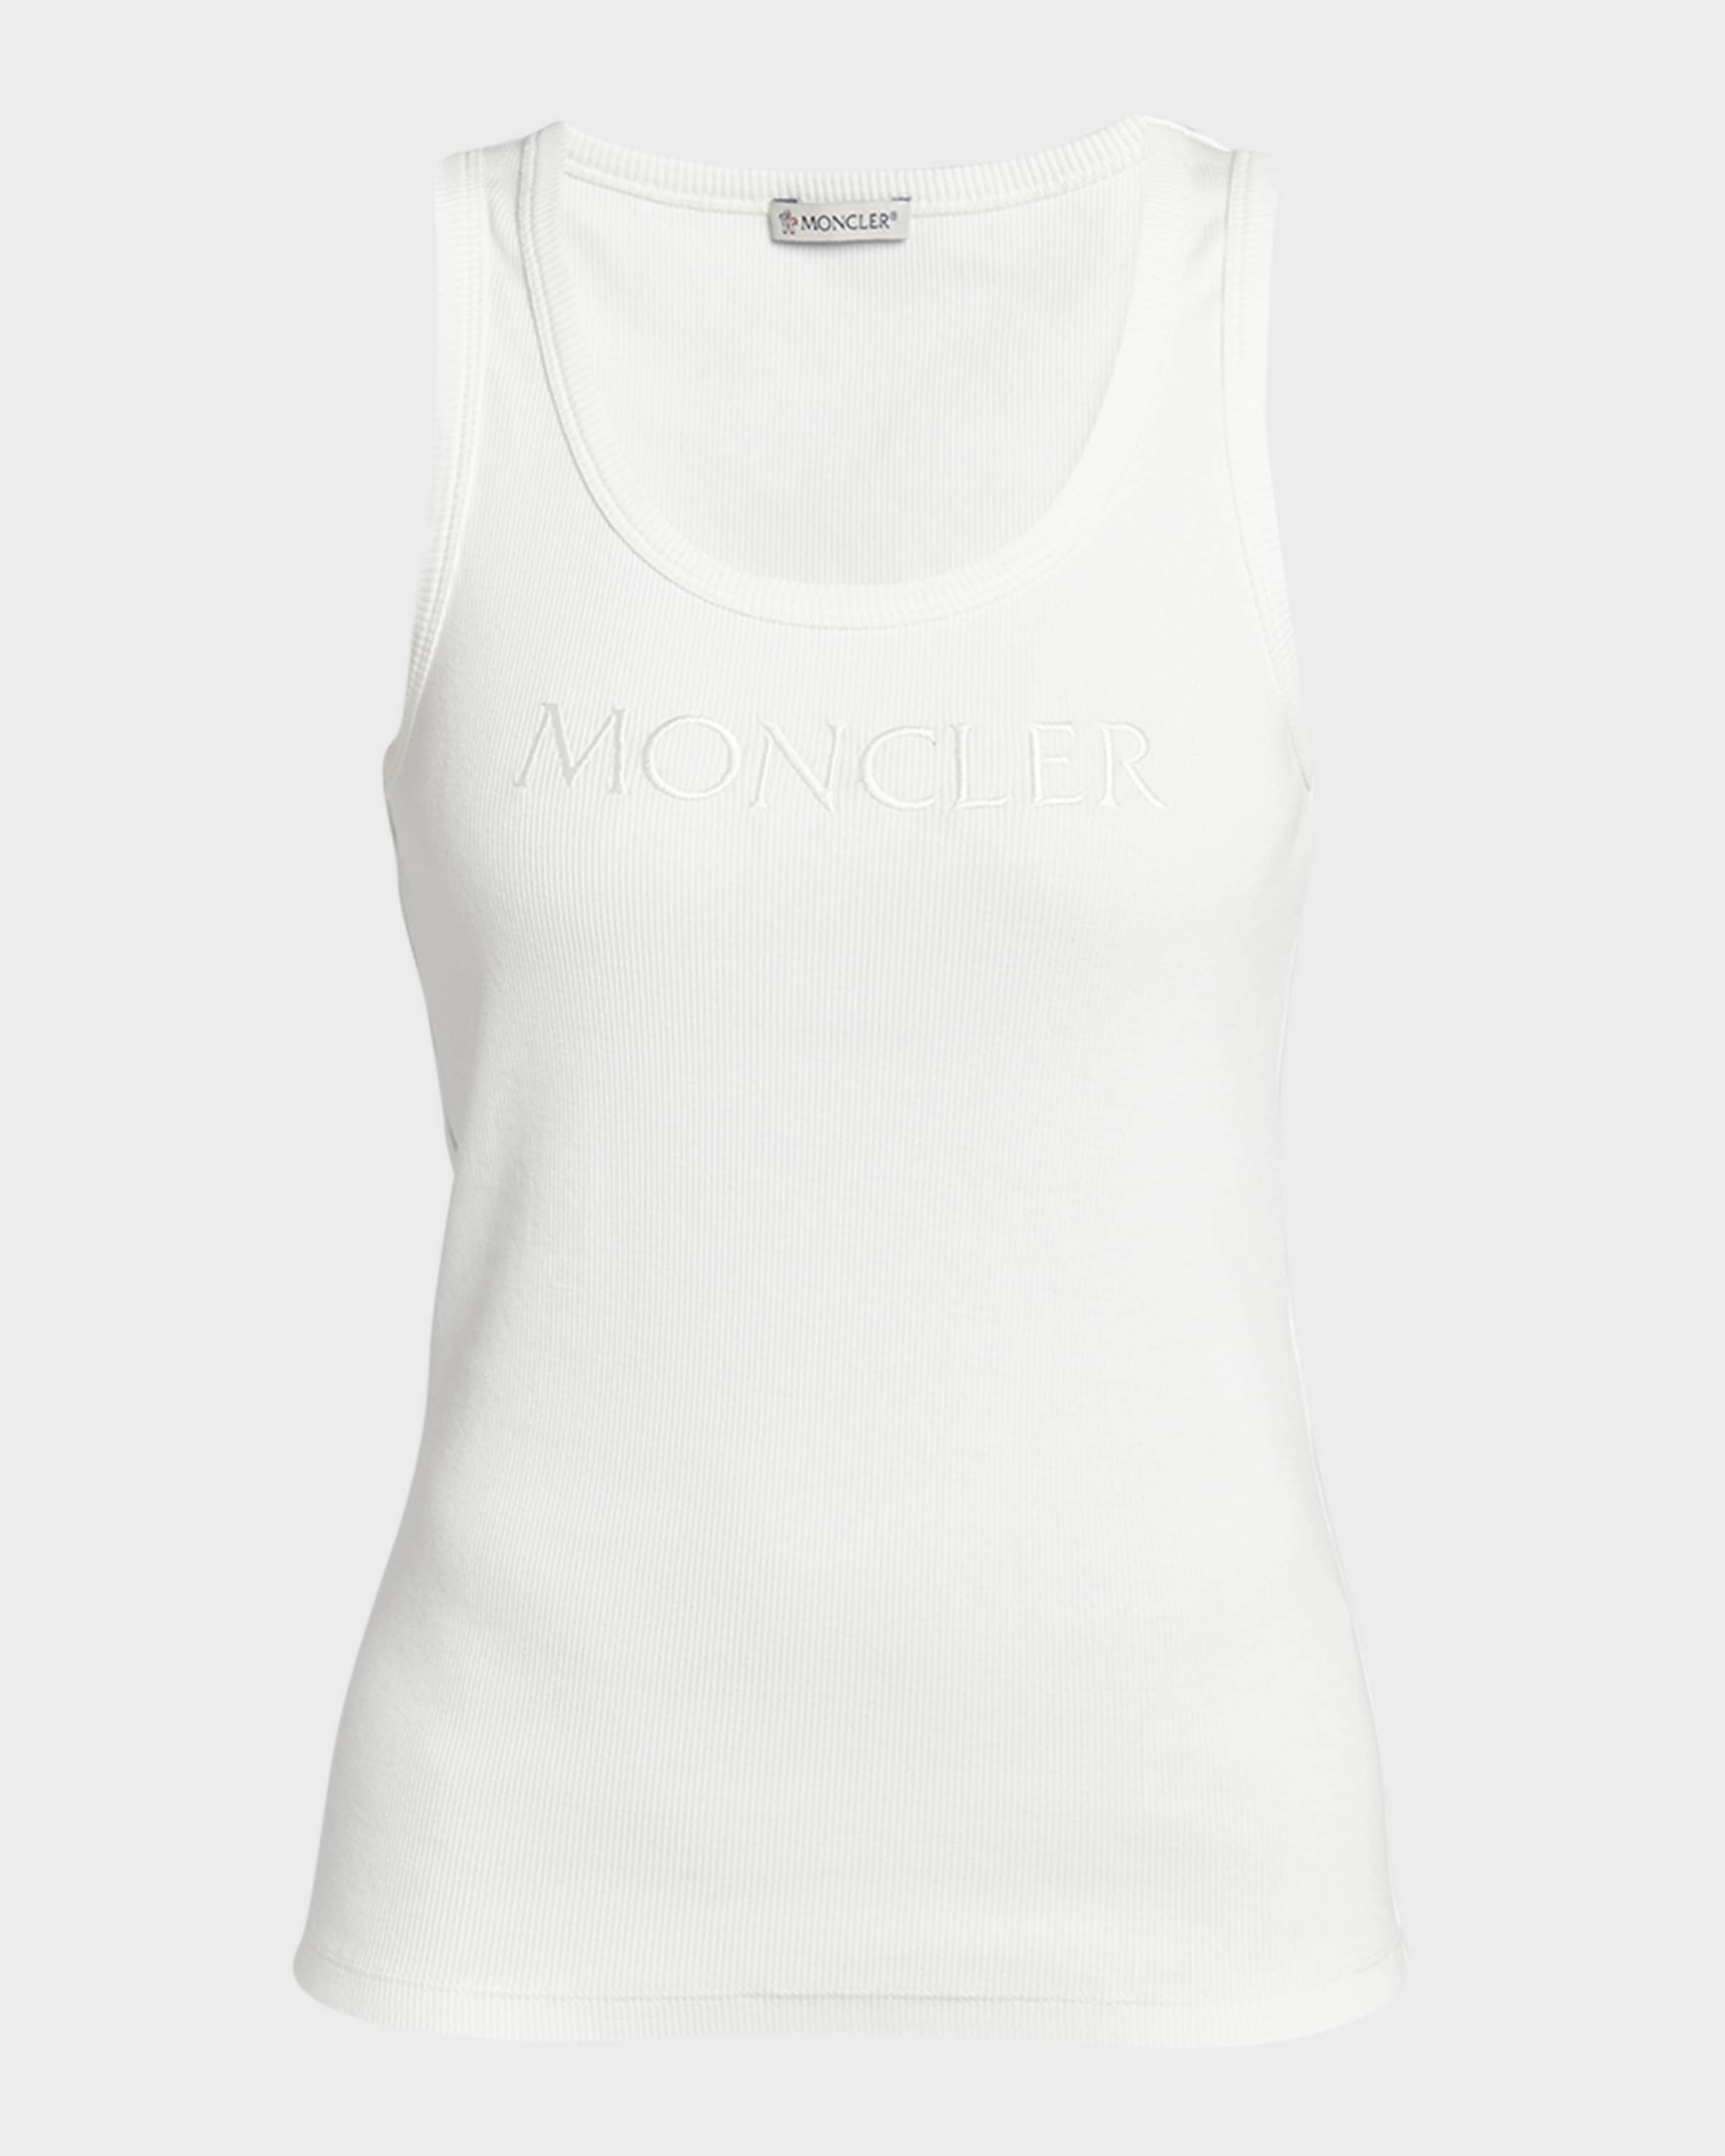 Embroidered Logo Jersey Tank Top - 1